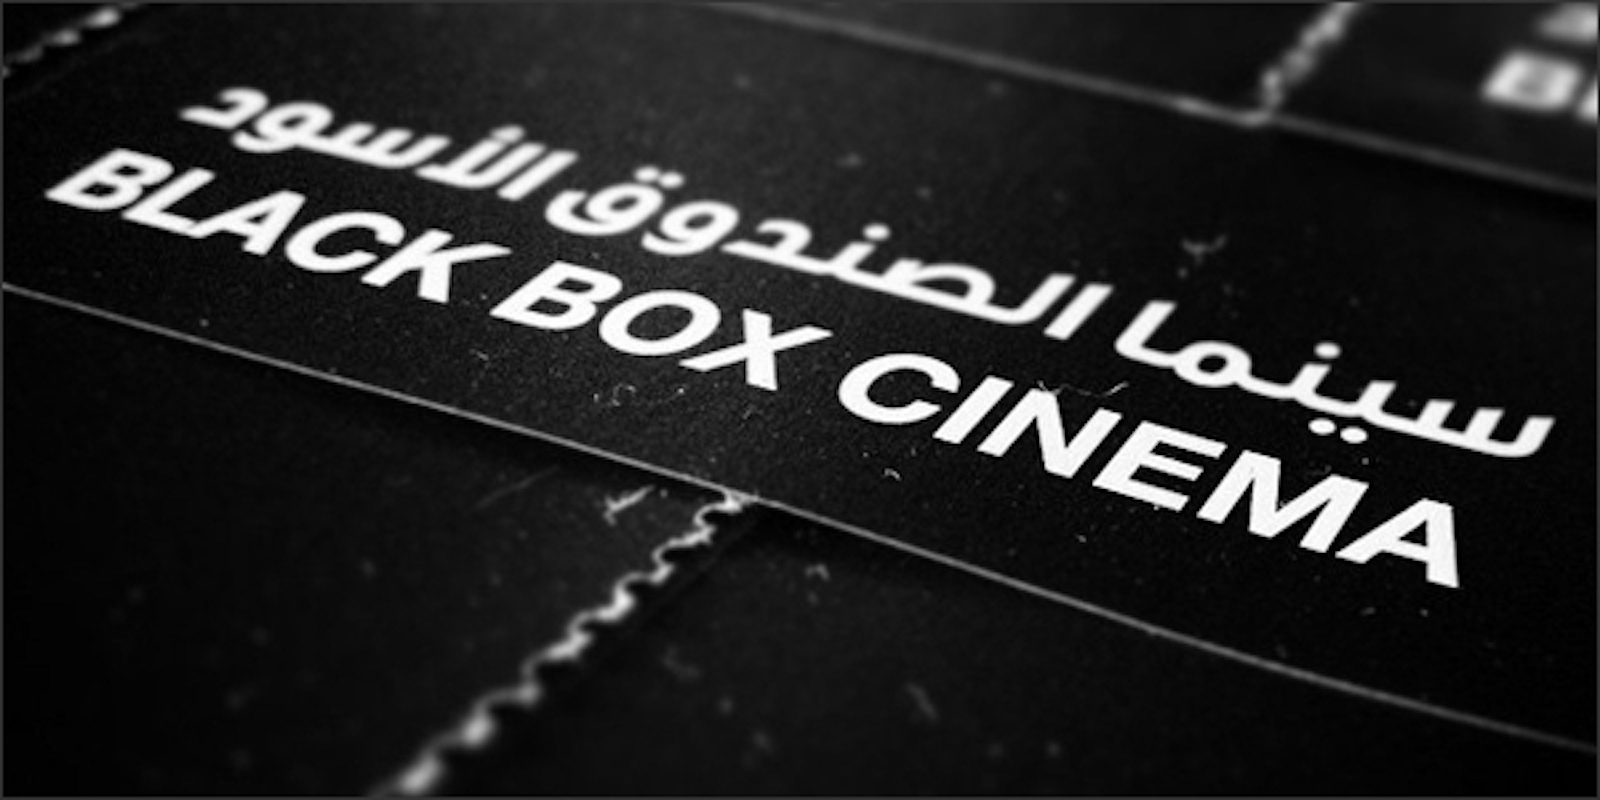 Last days to submit your project to Black Box Cinema in UAE